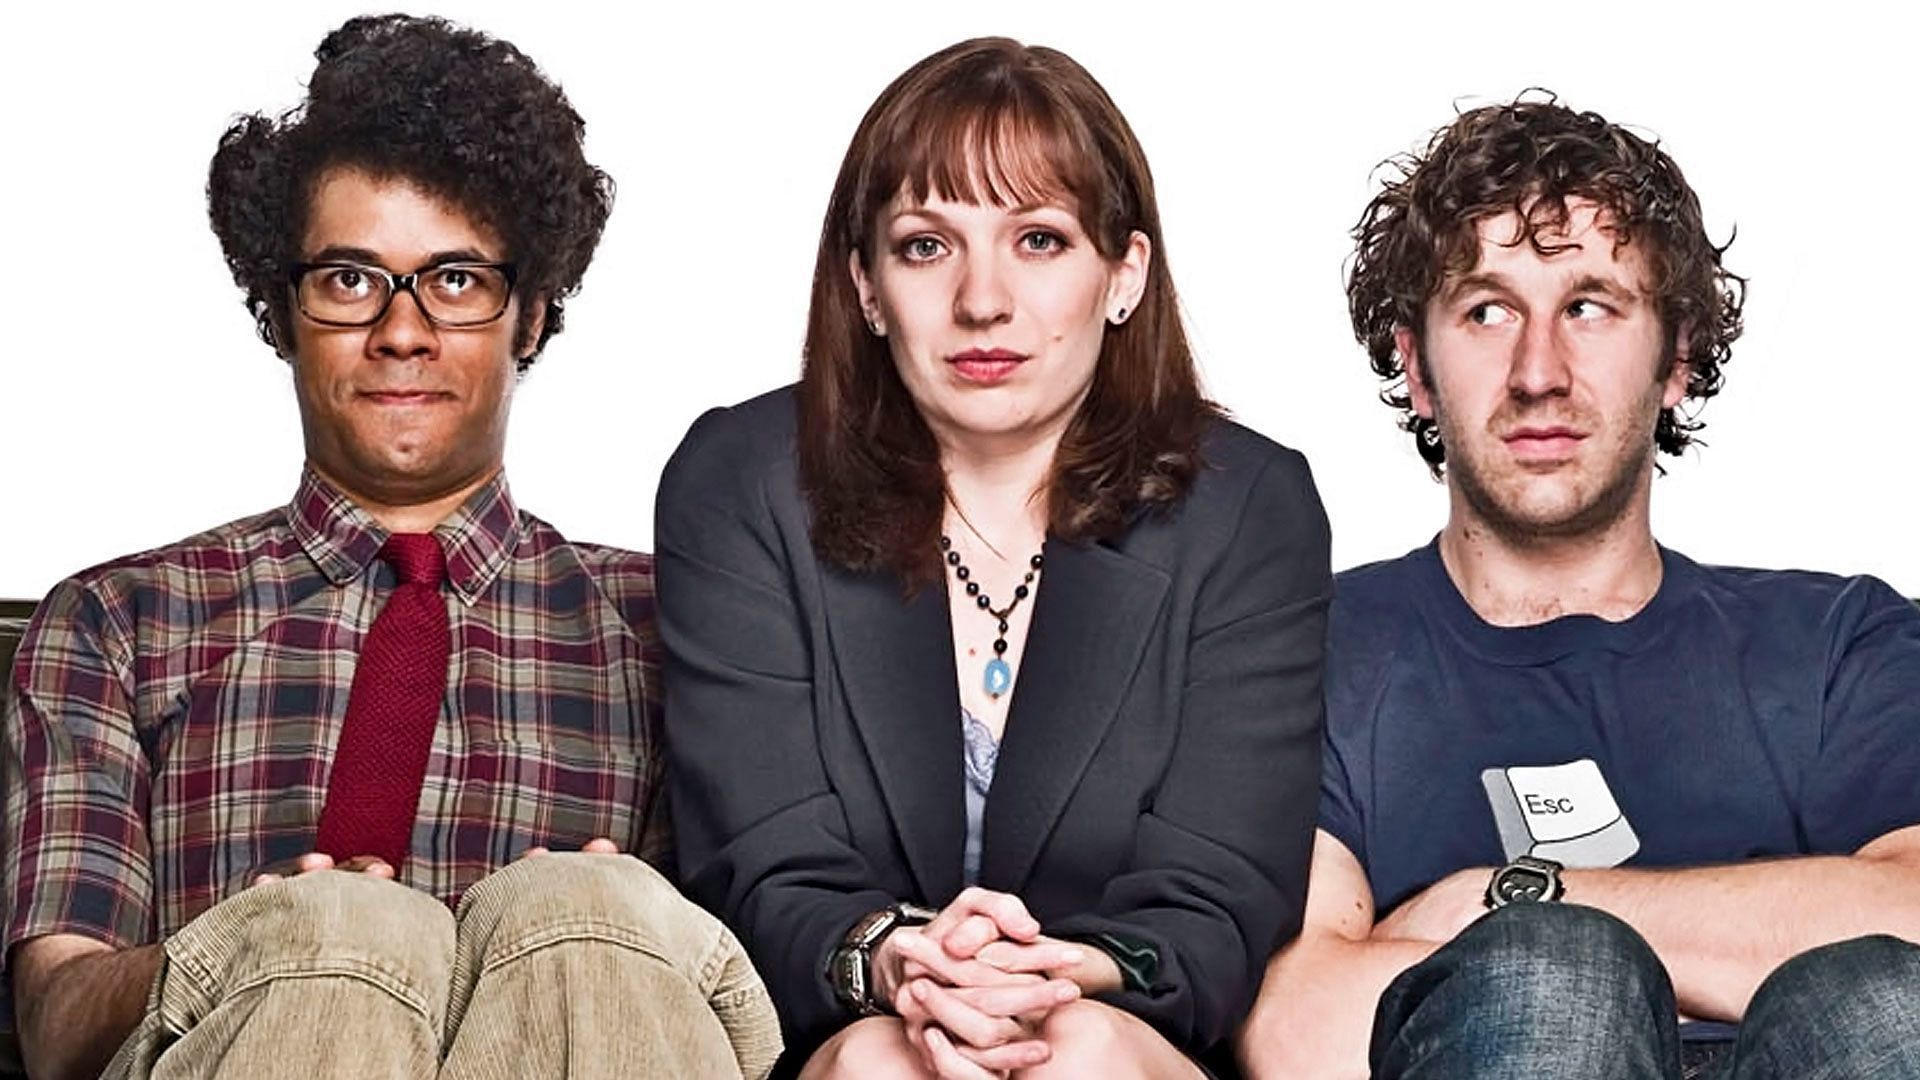 A still from The IT Crowd (Image via Channel 4)